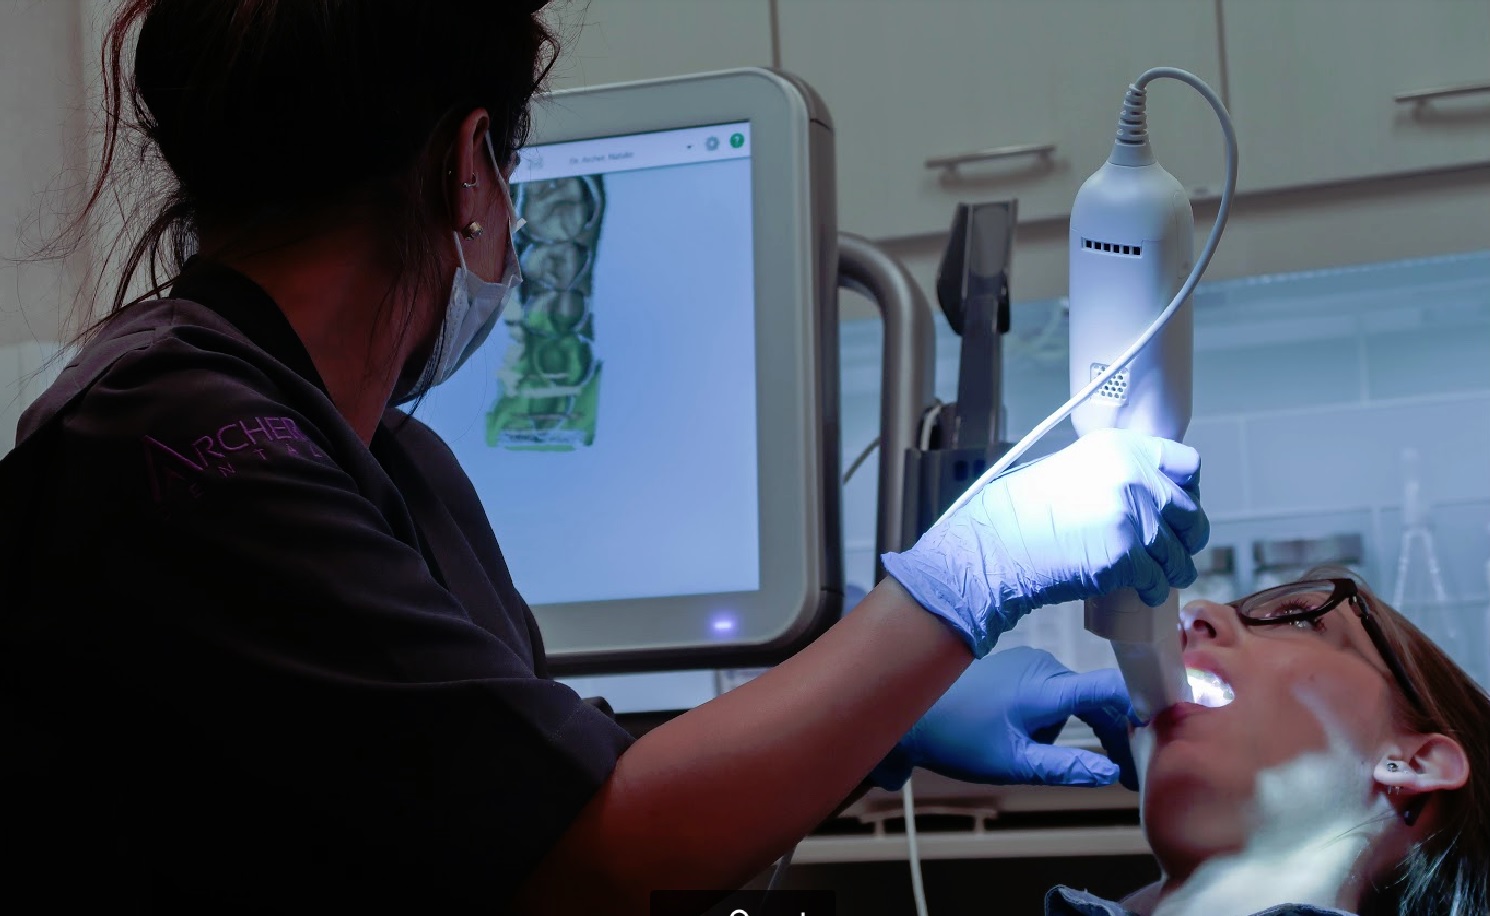 Dental assistant uses i-teroscanner to to scan teeth alignment, occlusion (bite) before using computer processer to plot correct/alignment.